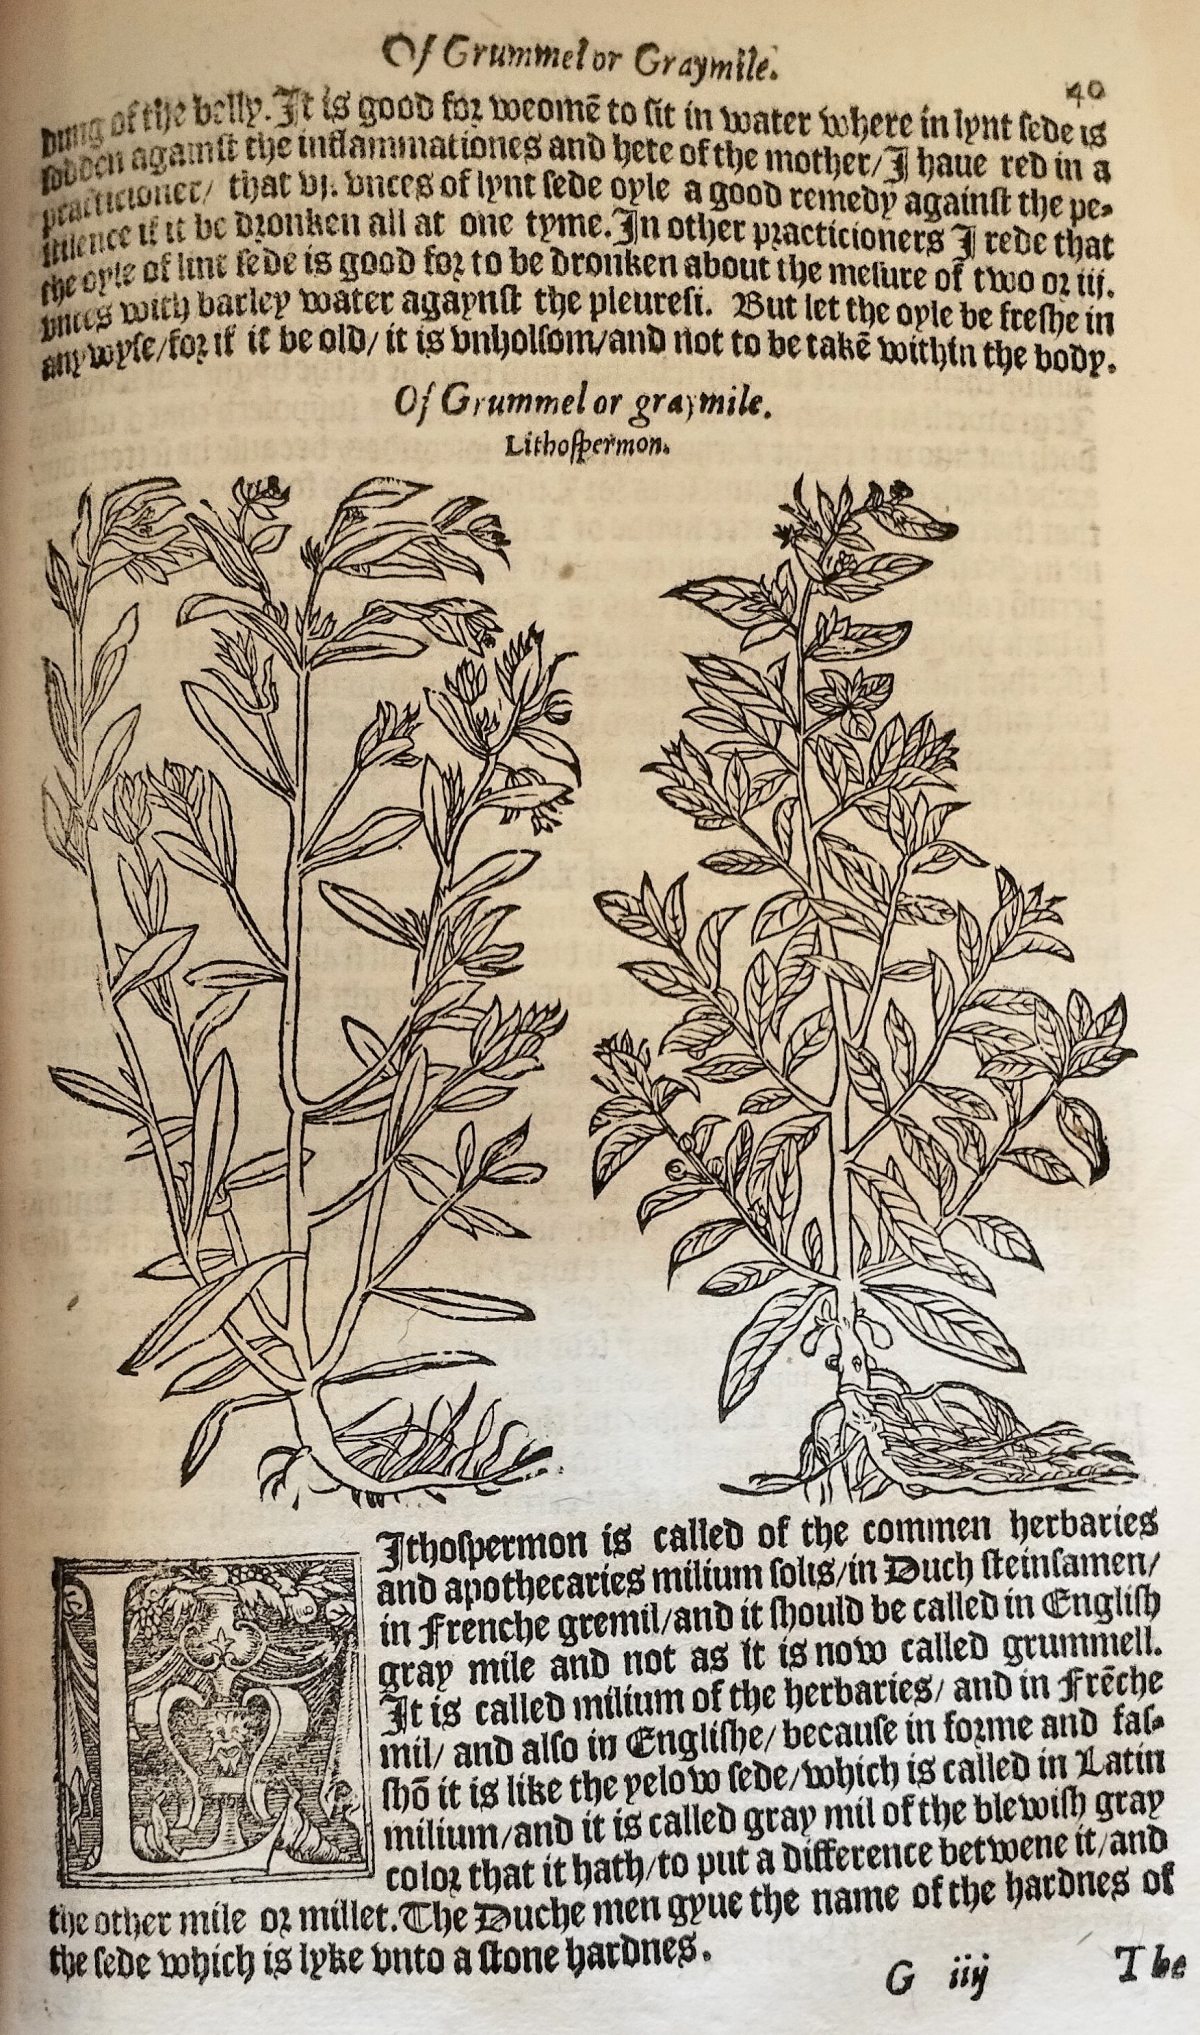 Page with the nomenclature, description and woodcuts illustration of the gromwell plant and flowers.